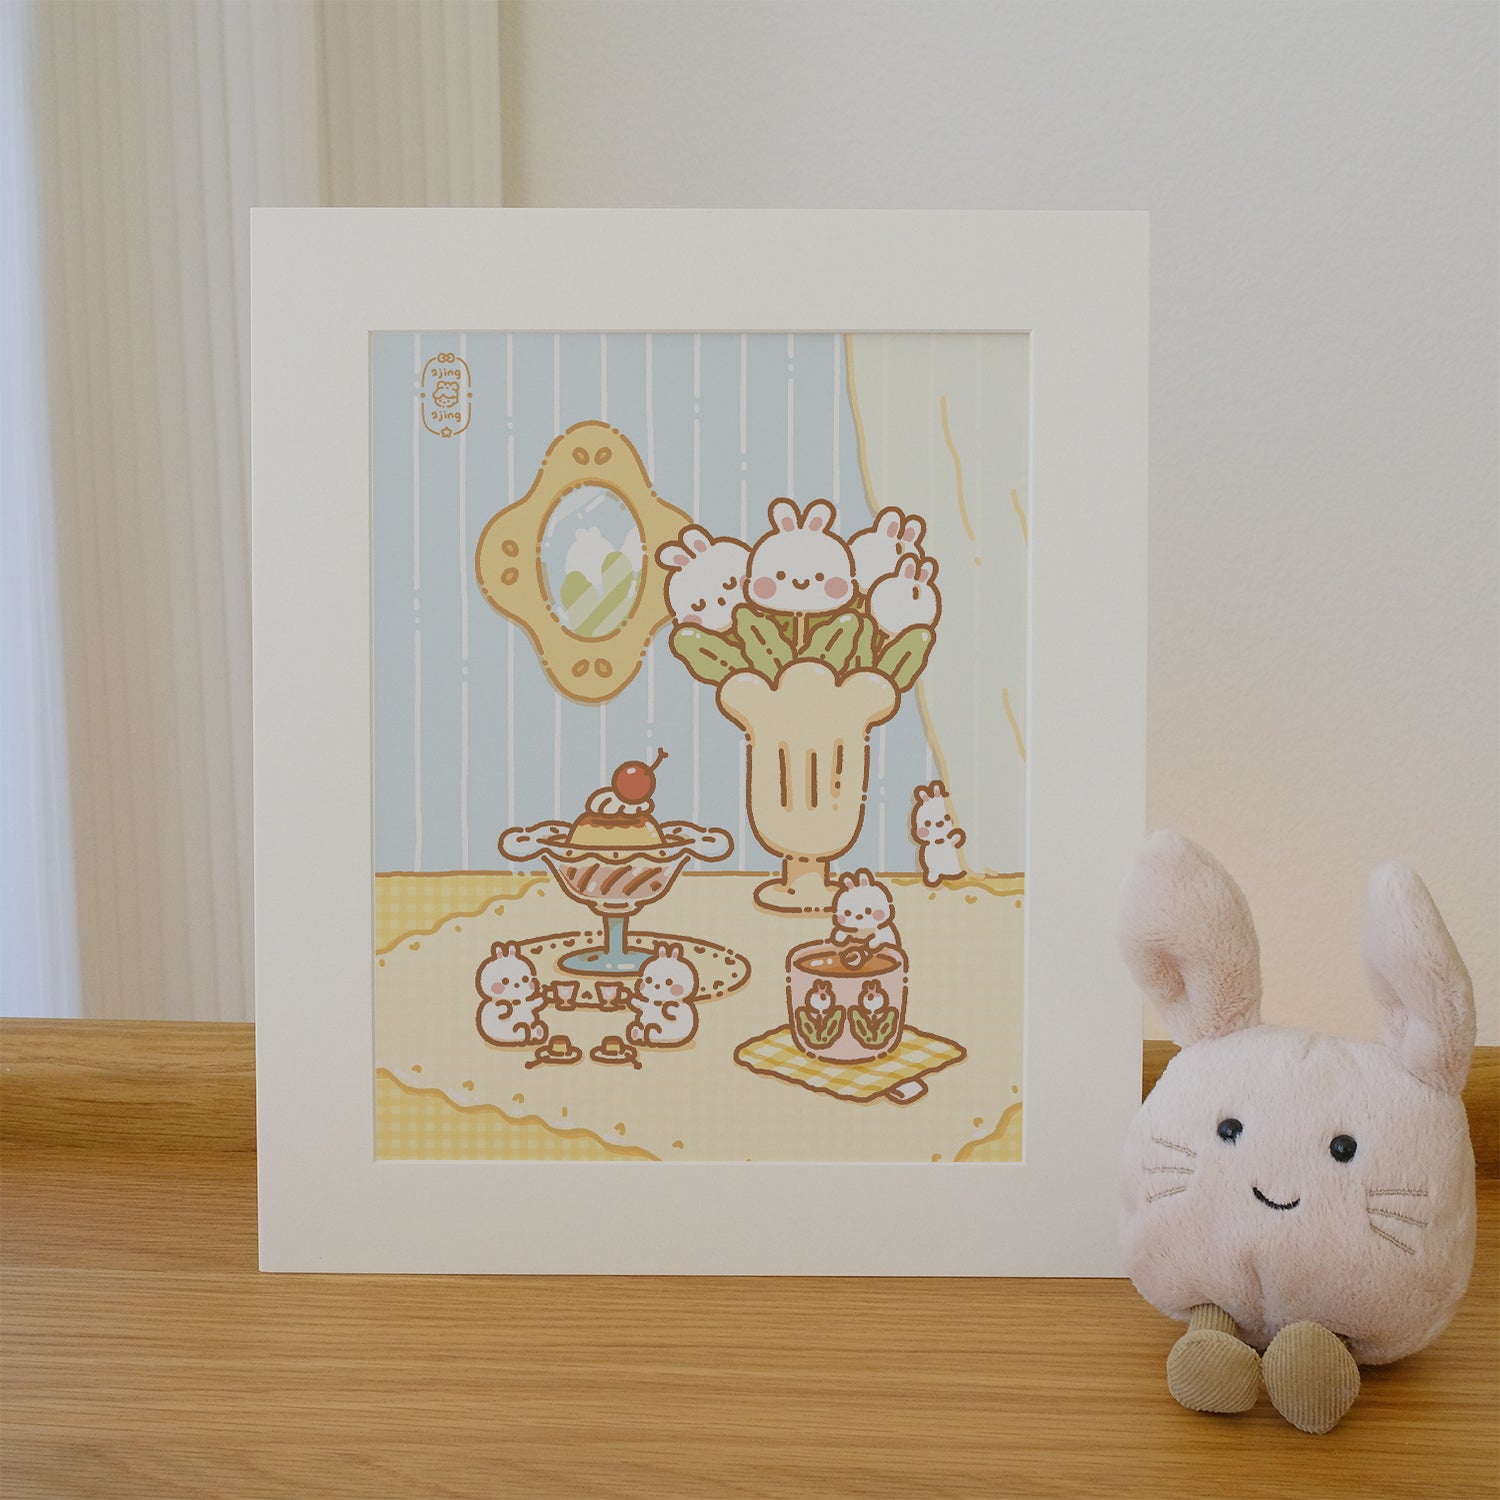 Bunnie's Afternoon Tea Art Print by 2jingis2jing (8.5 x 11 inches)